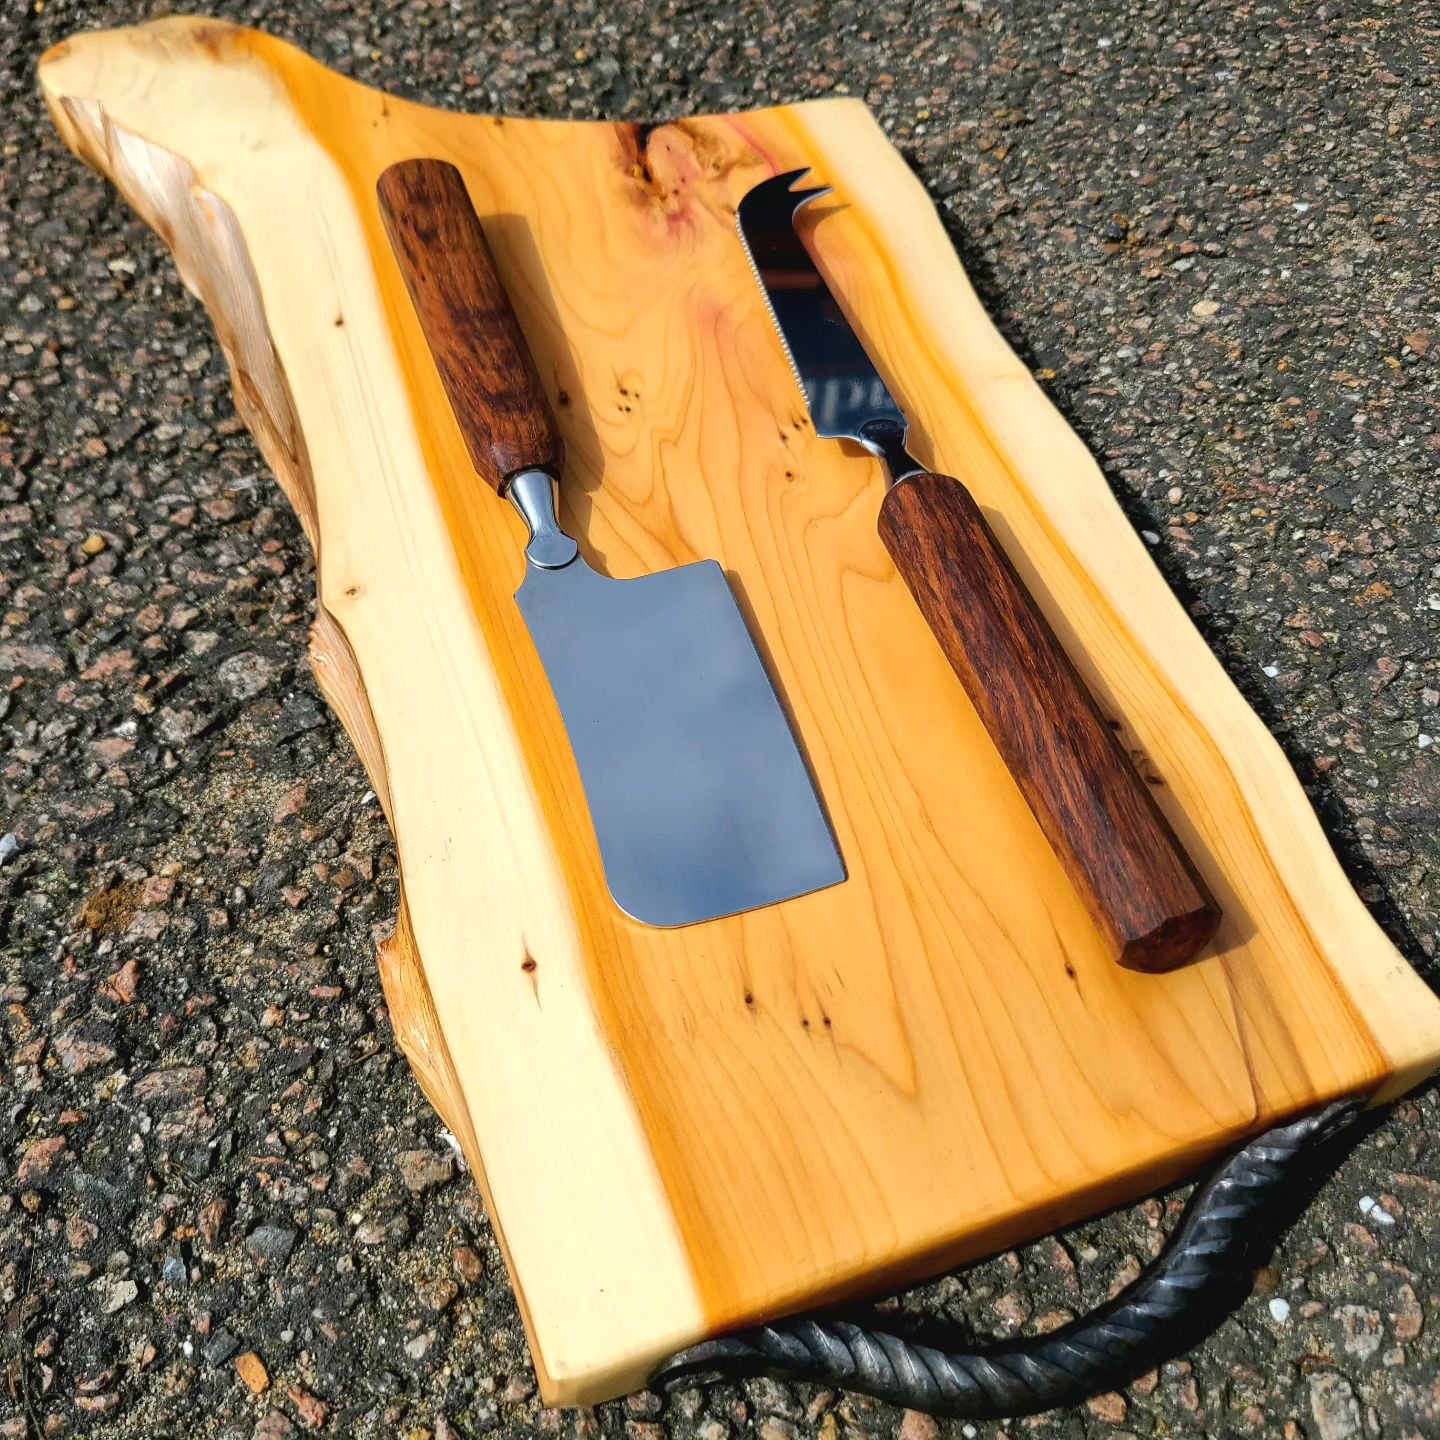 I had a whole lot of fun today with taking some photos of for our new course we will be offering especially for our cheese lovers. English Yew cheeseboard with forged handle, stainless steel cheese knife and cheese axe with antique oakhandles. Finish